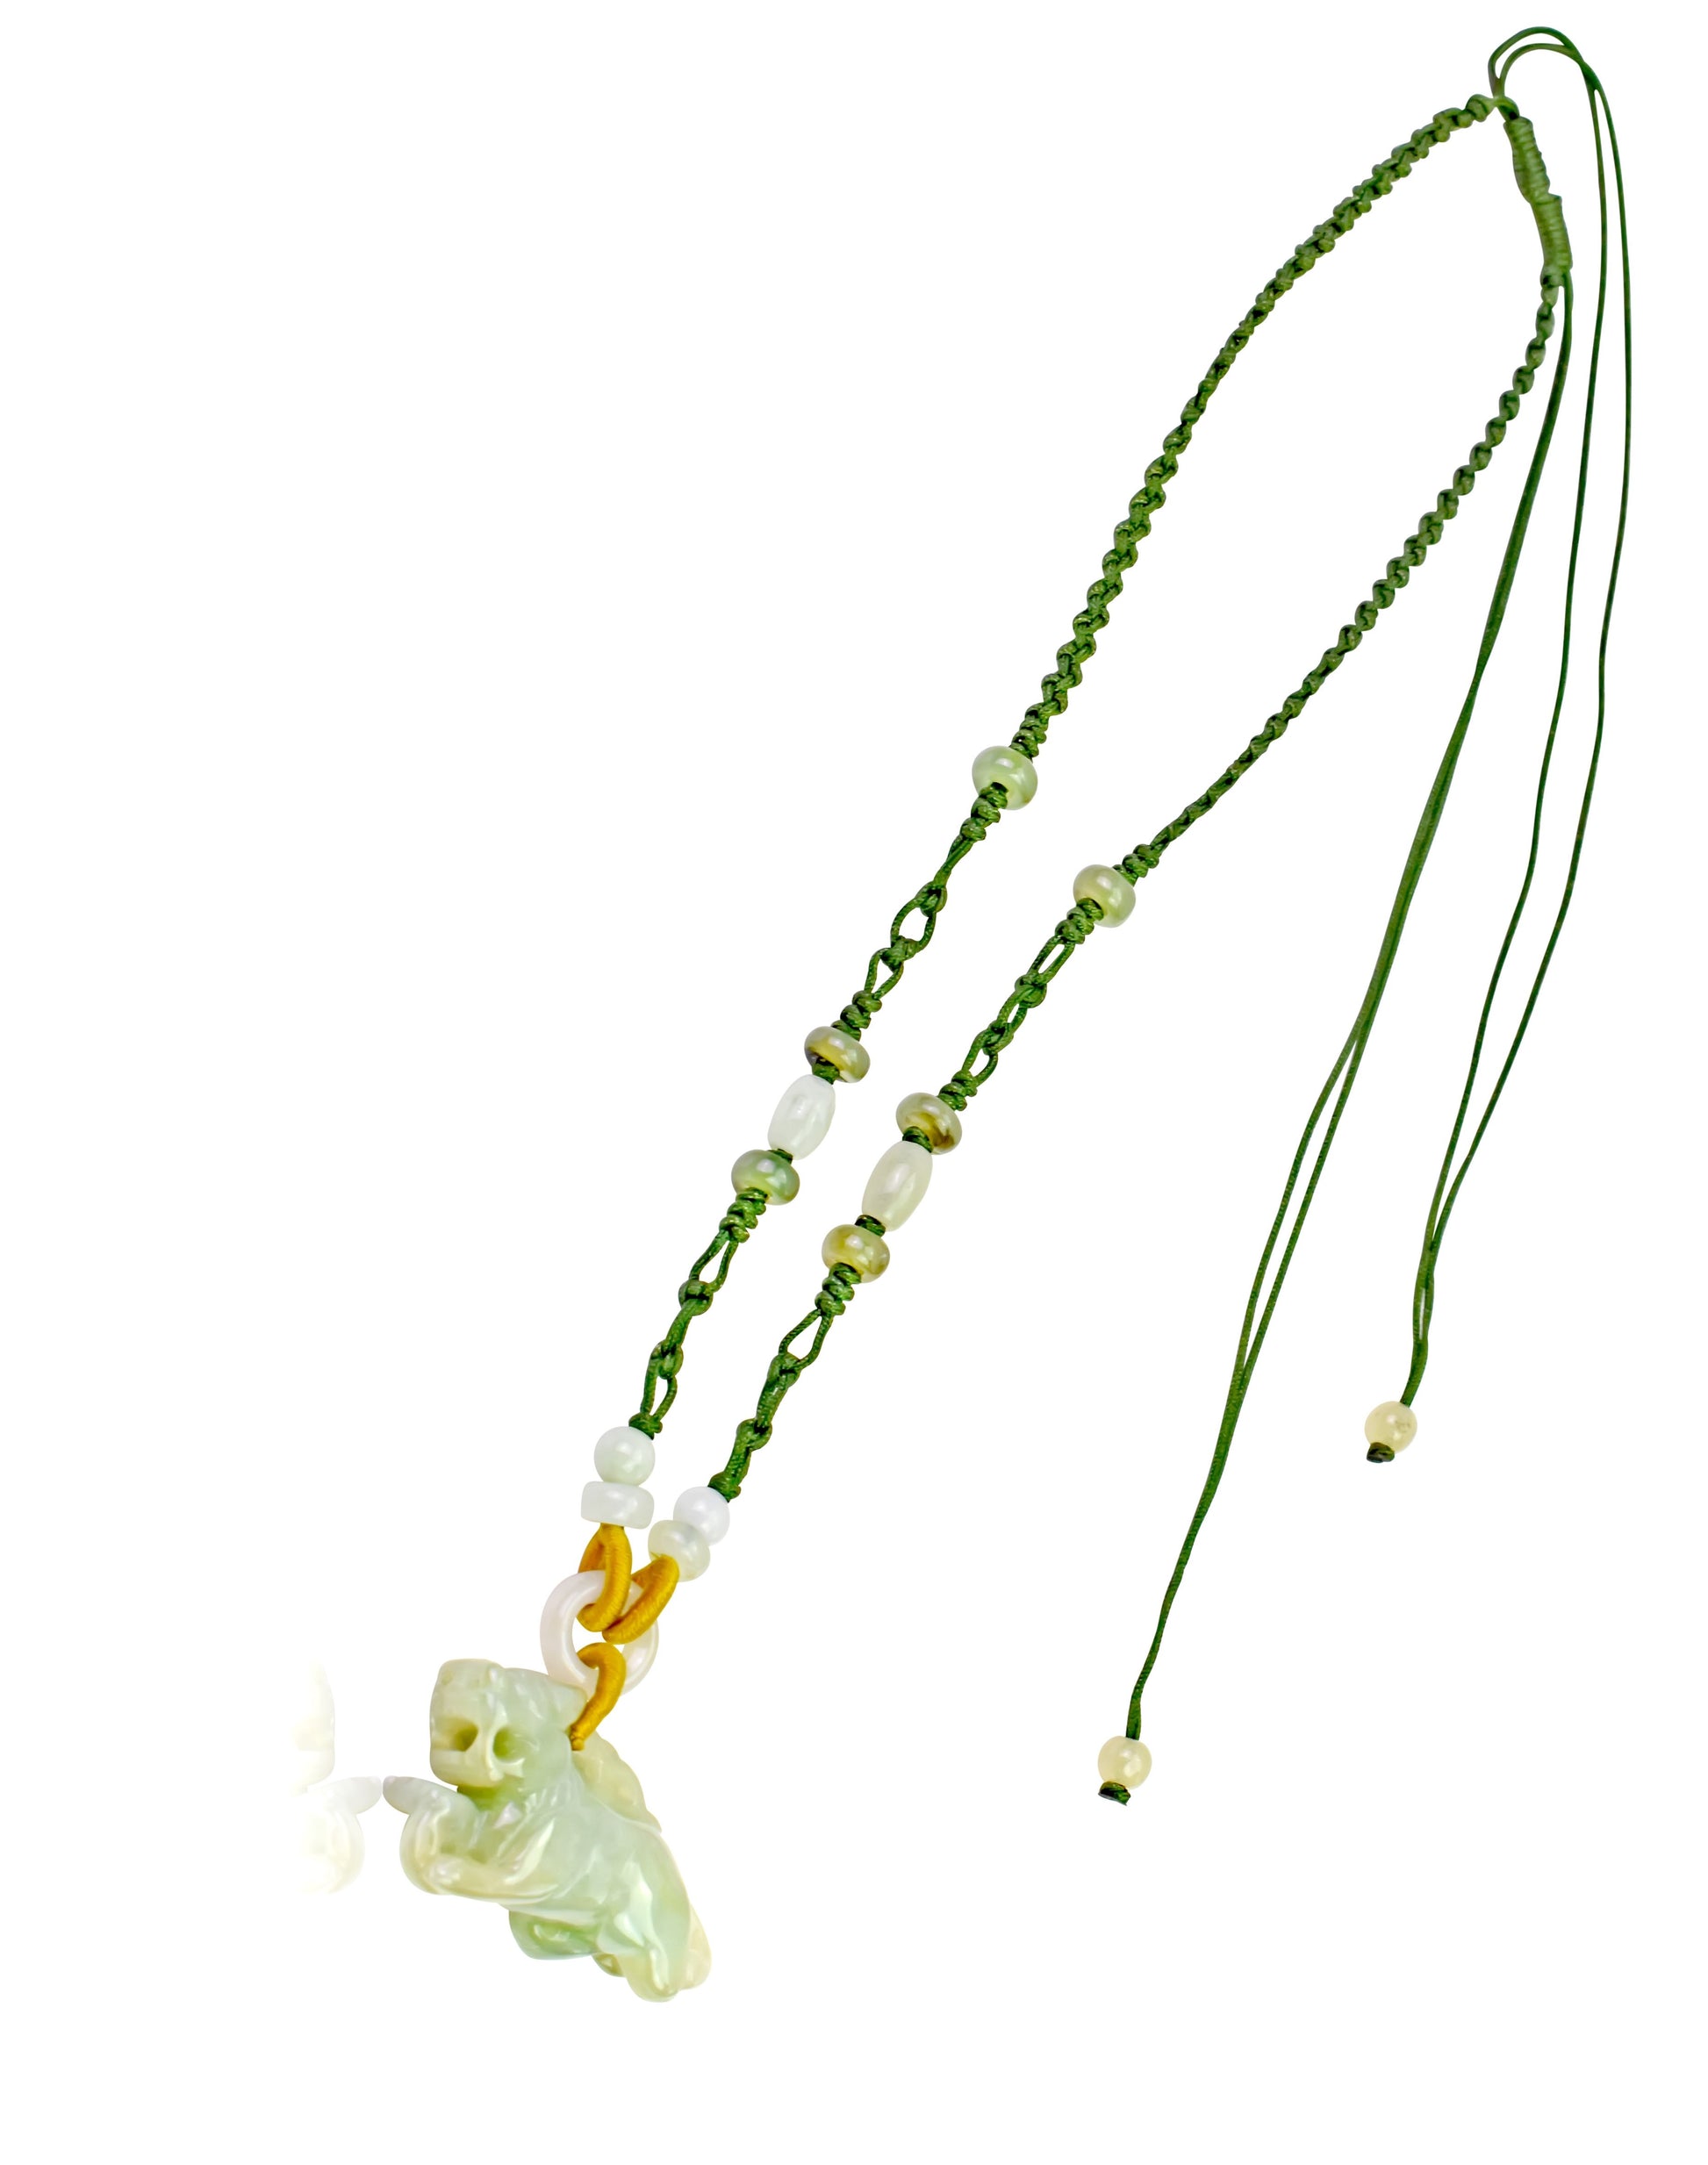 Unleash Your Inner Lion with a Handmade Jade Pendant made with Green Cord